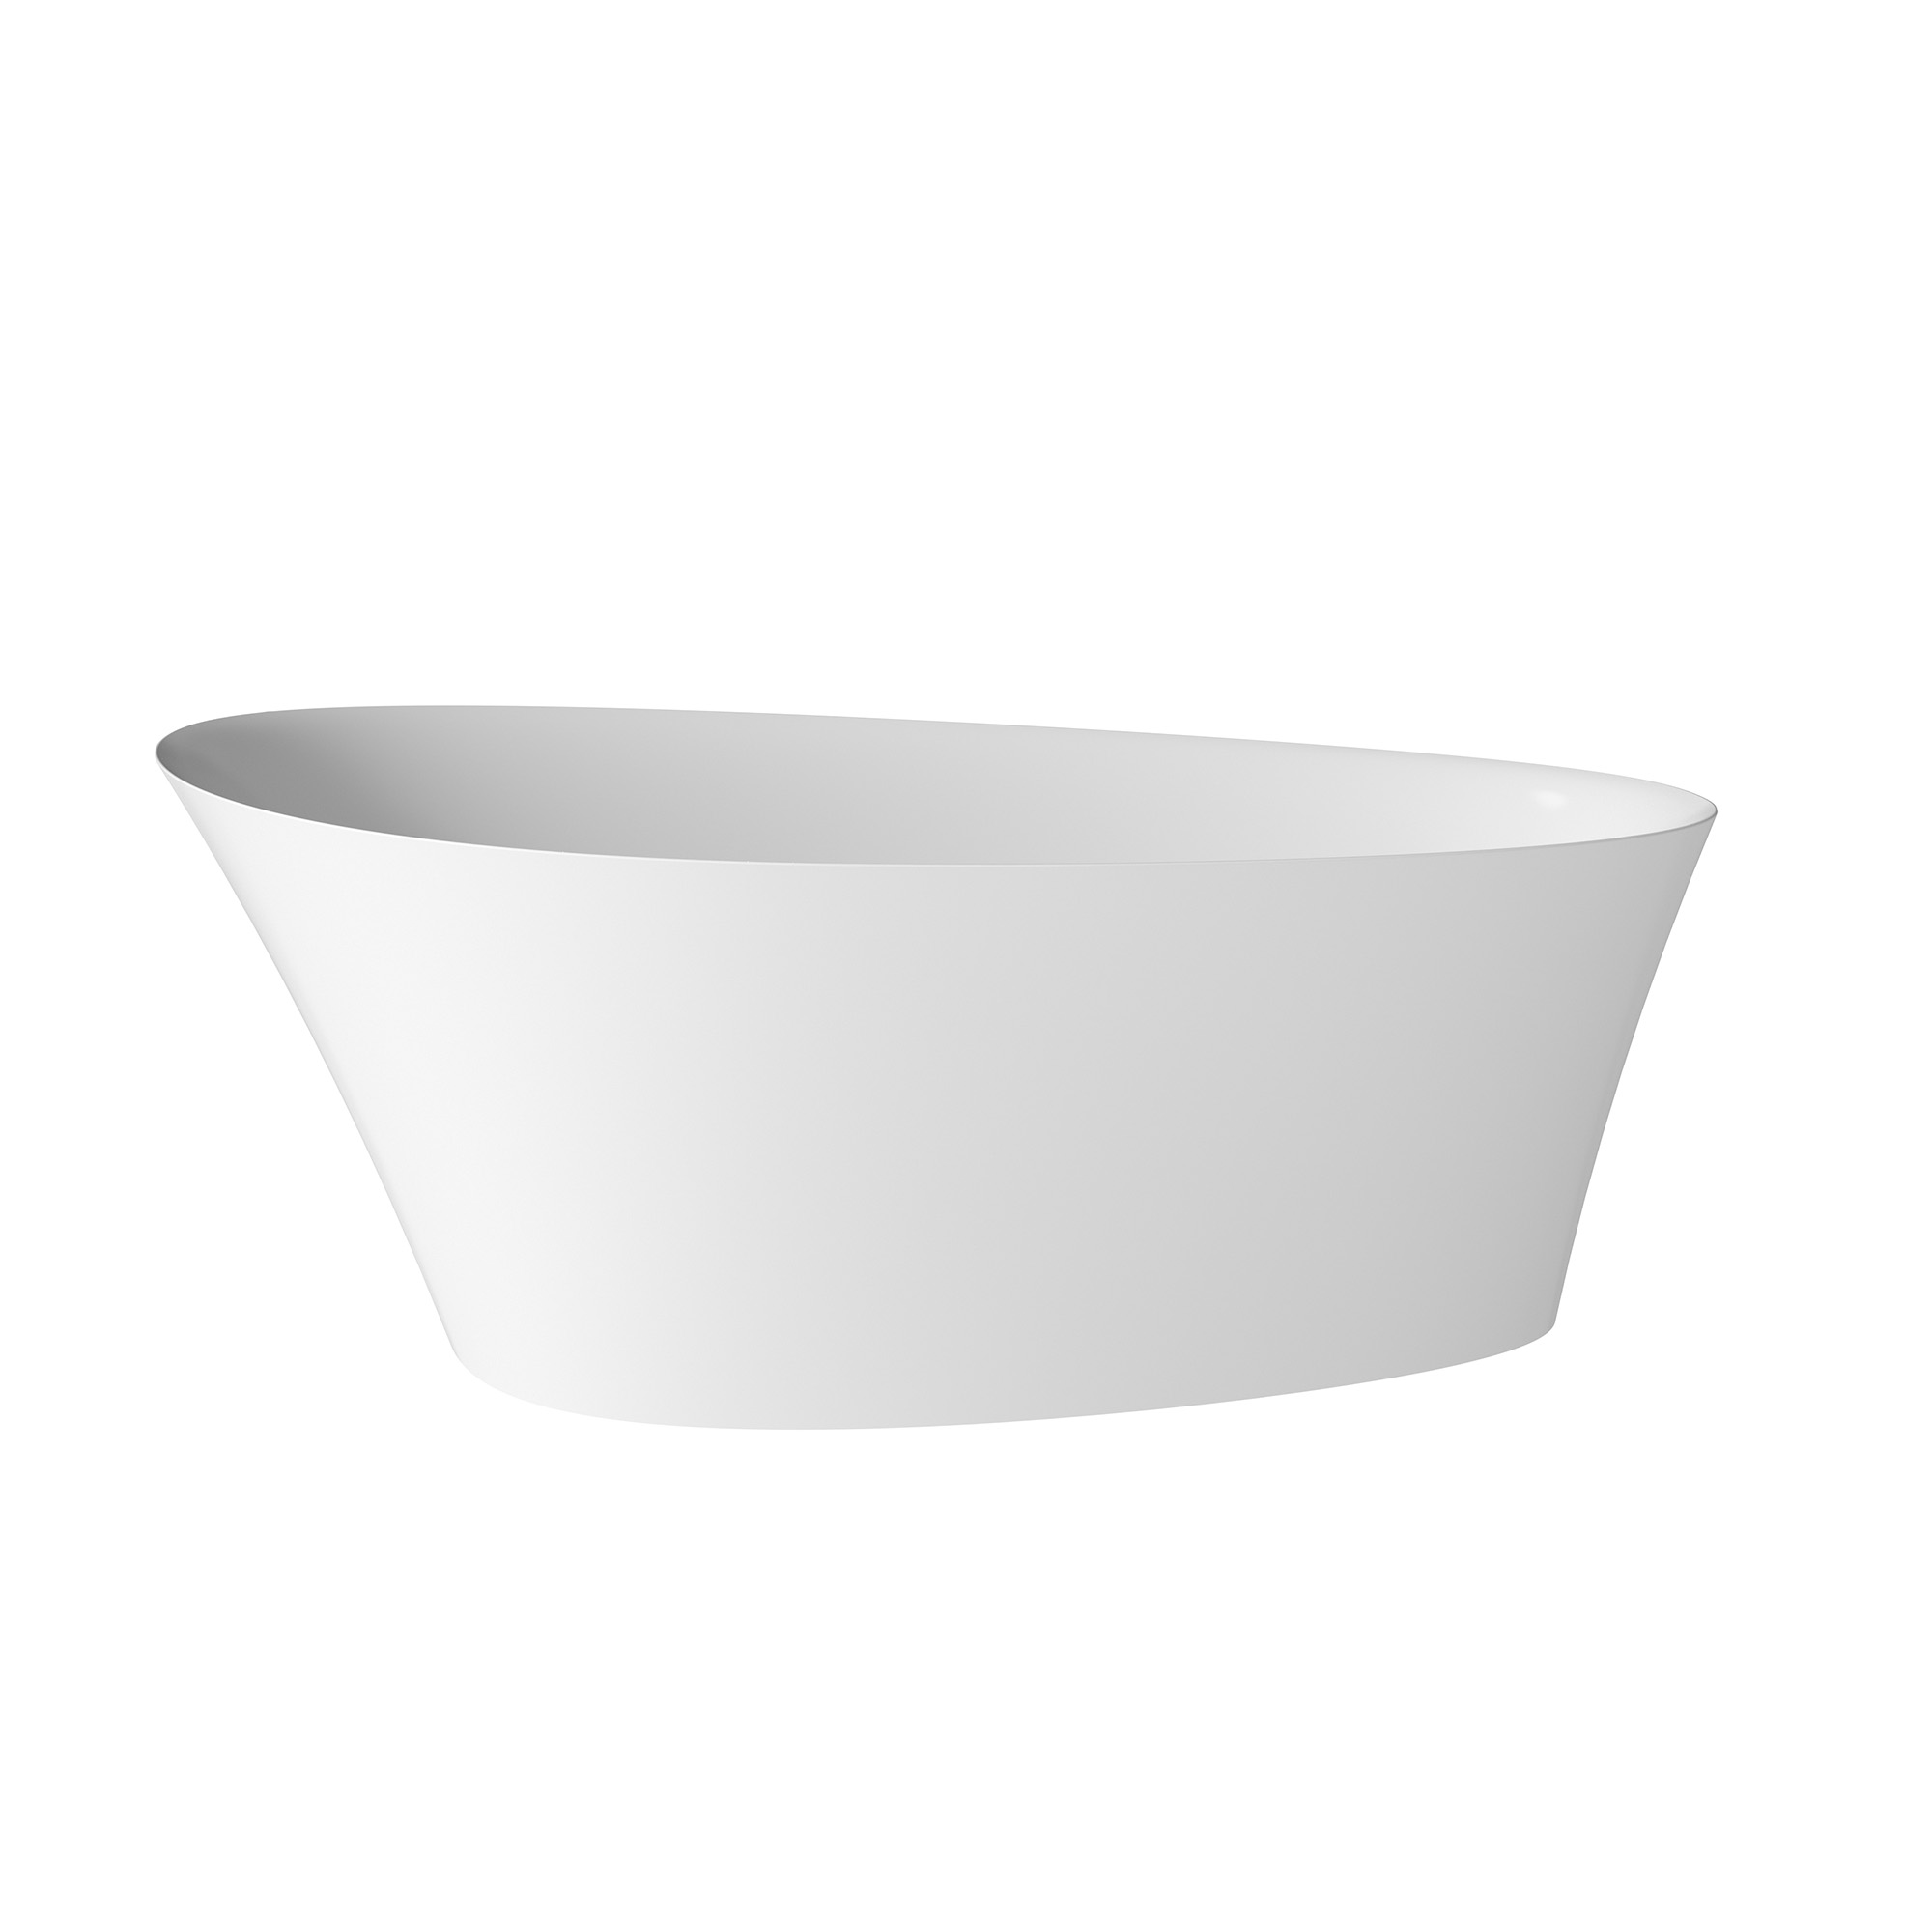 65" Solid Surface Freestanding Tub, Egg Shell Shaped Stone Resin Tubs with Overflow and Drain, Matte White